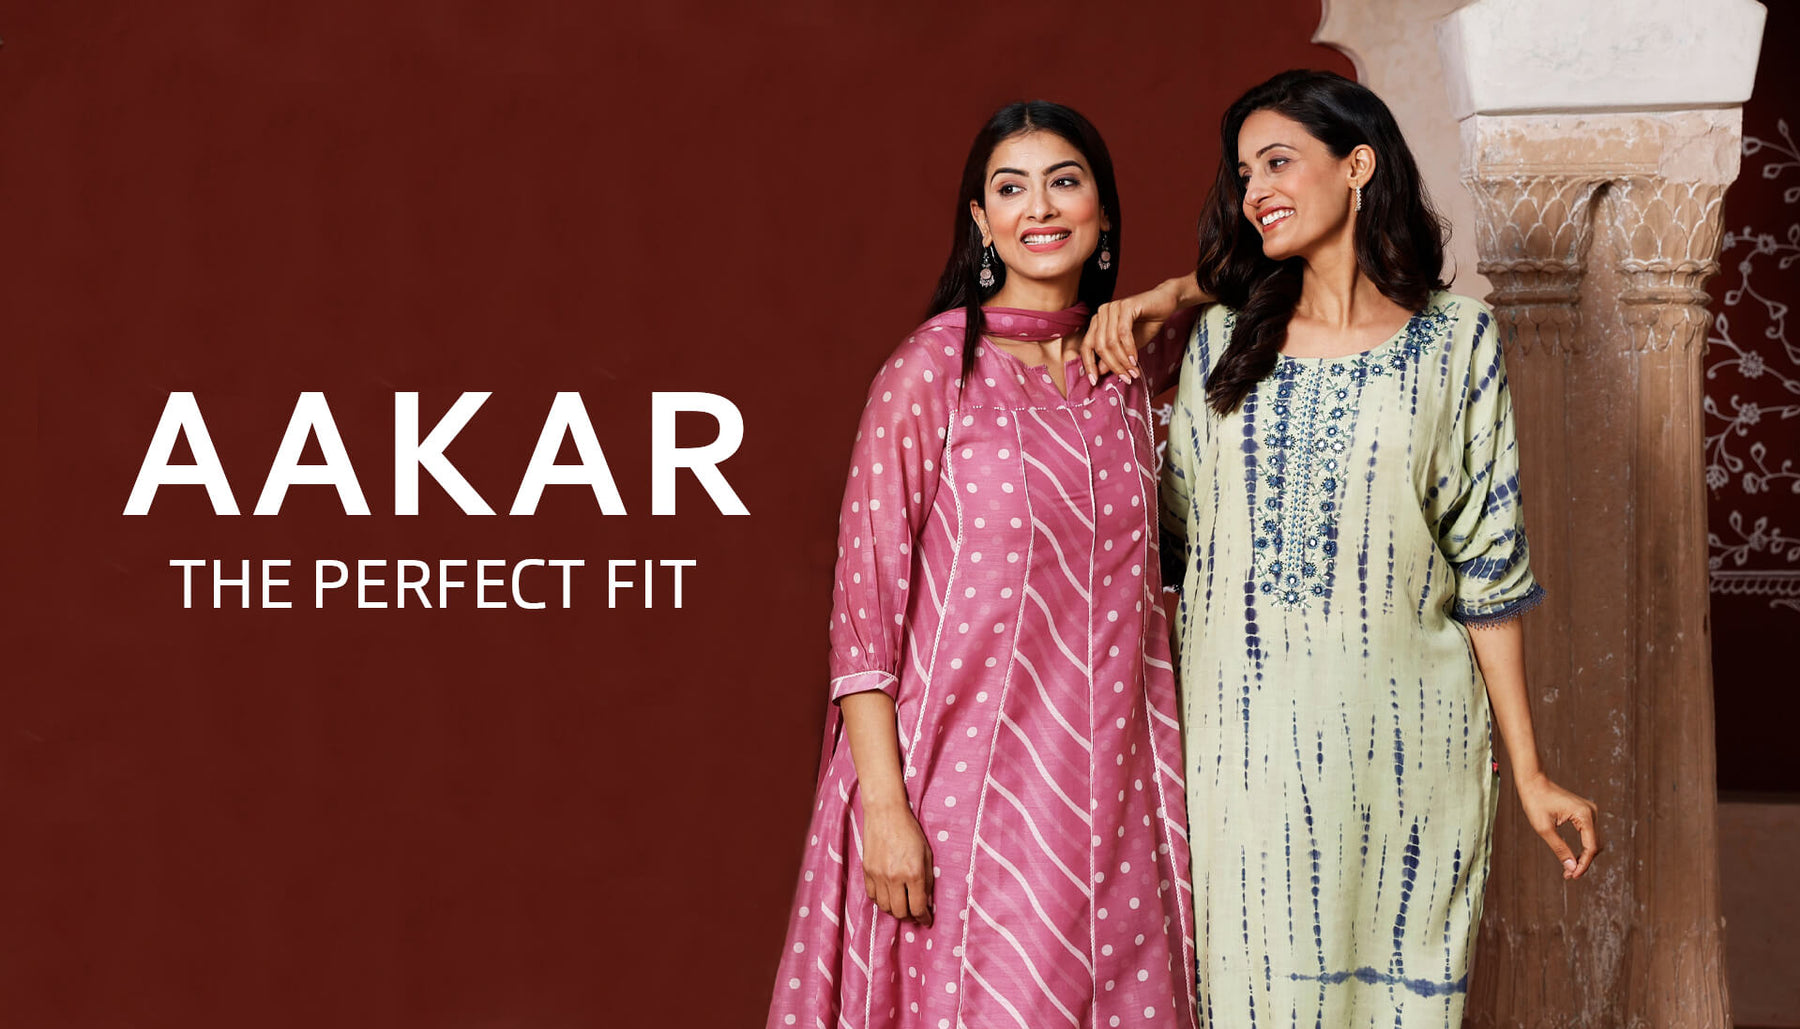 Aakar – The Perfect Fit